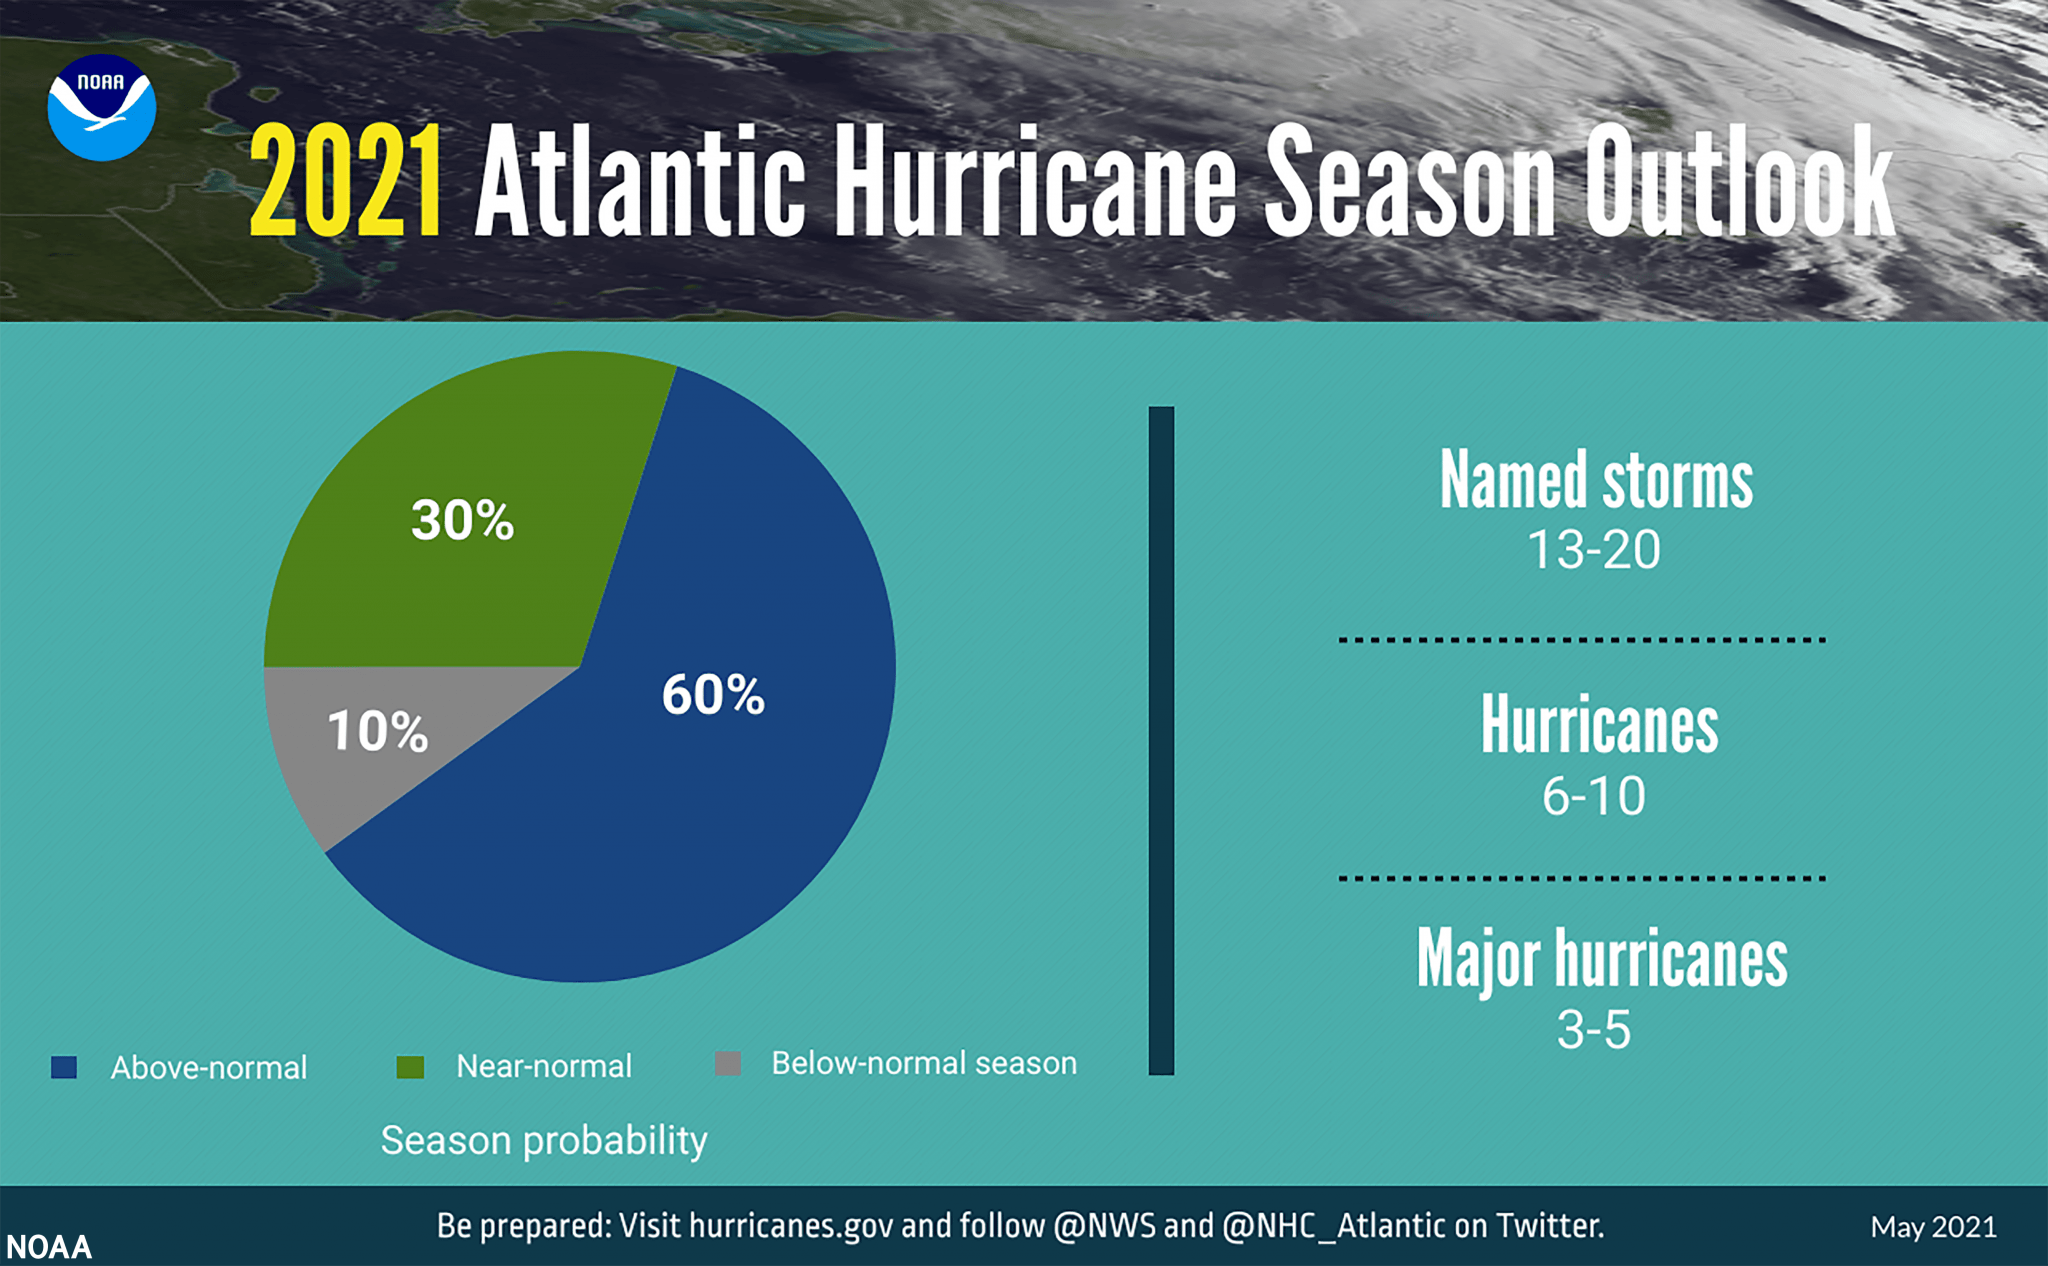 A summary infographic showing hurricane season probability and numbers of named storms predicted from NOAA’s 2021 Atlantic Hurricane Season Outlook. (NOAA)